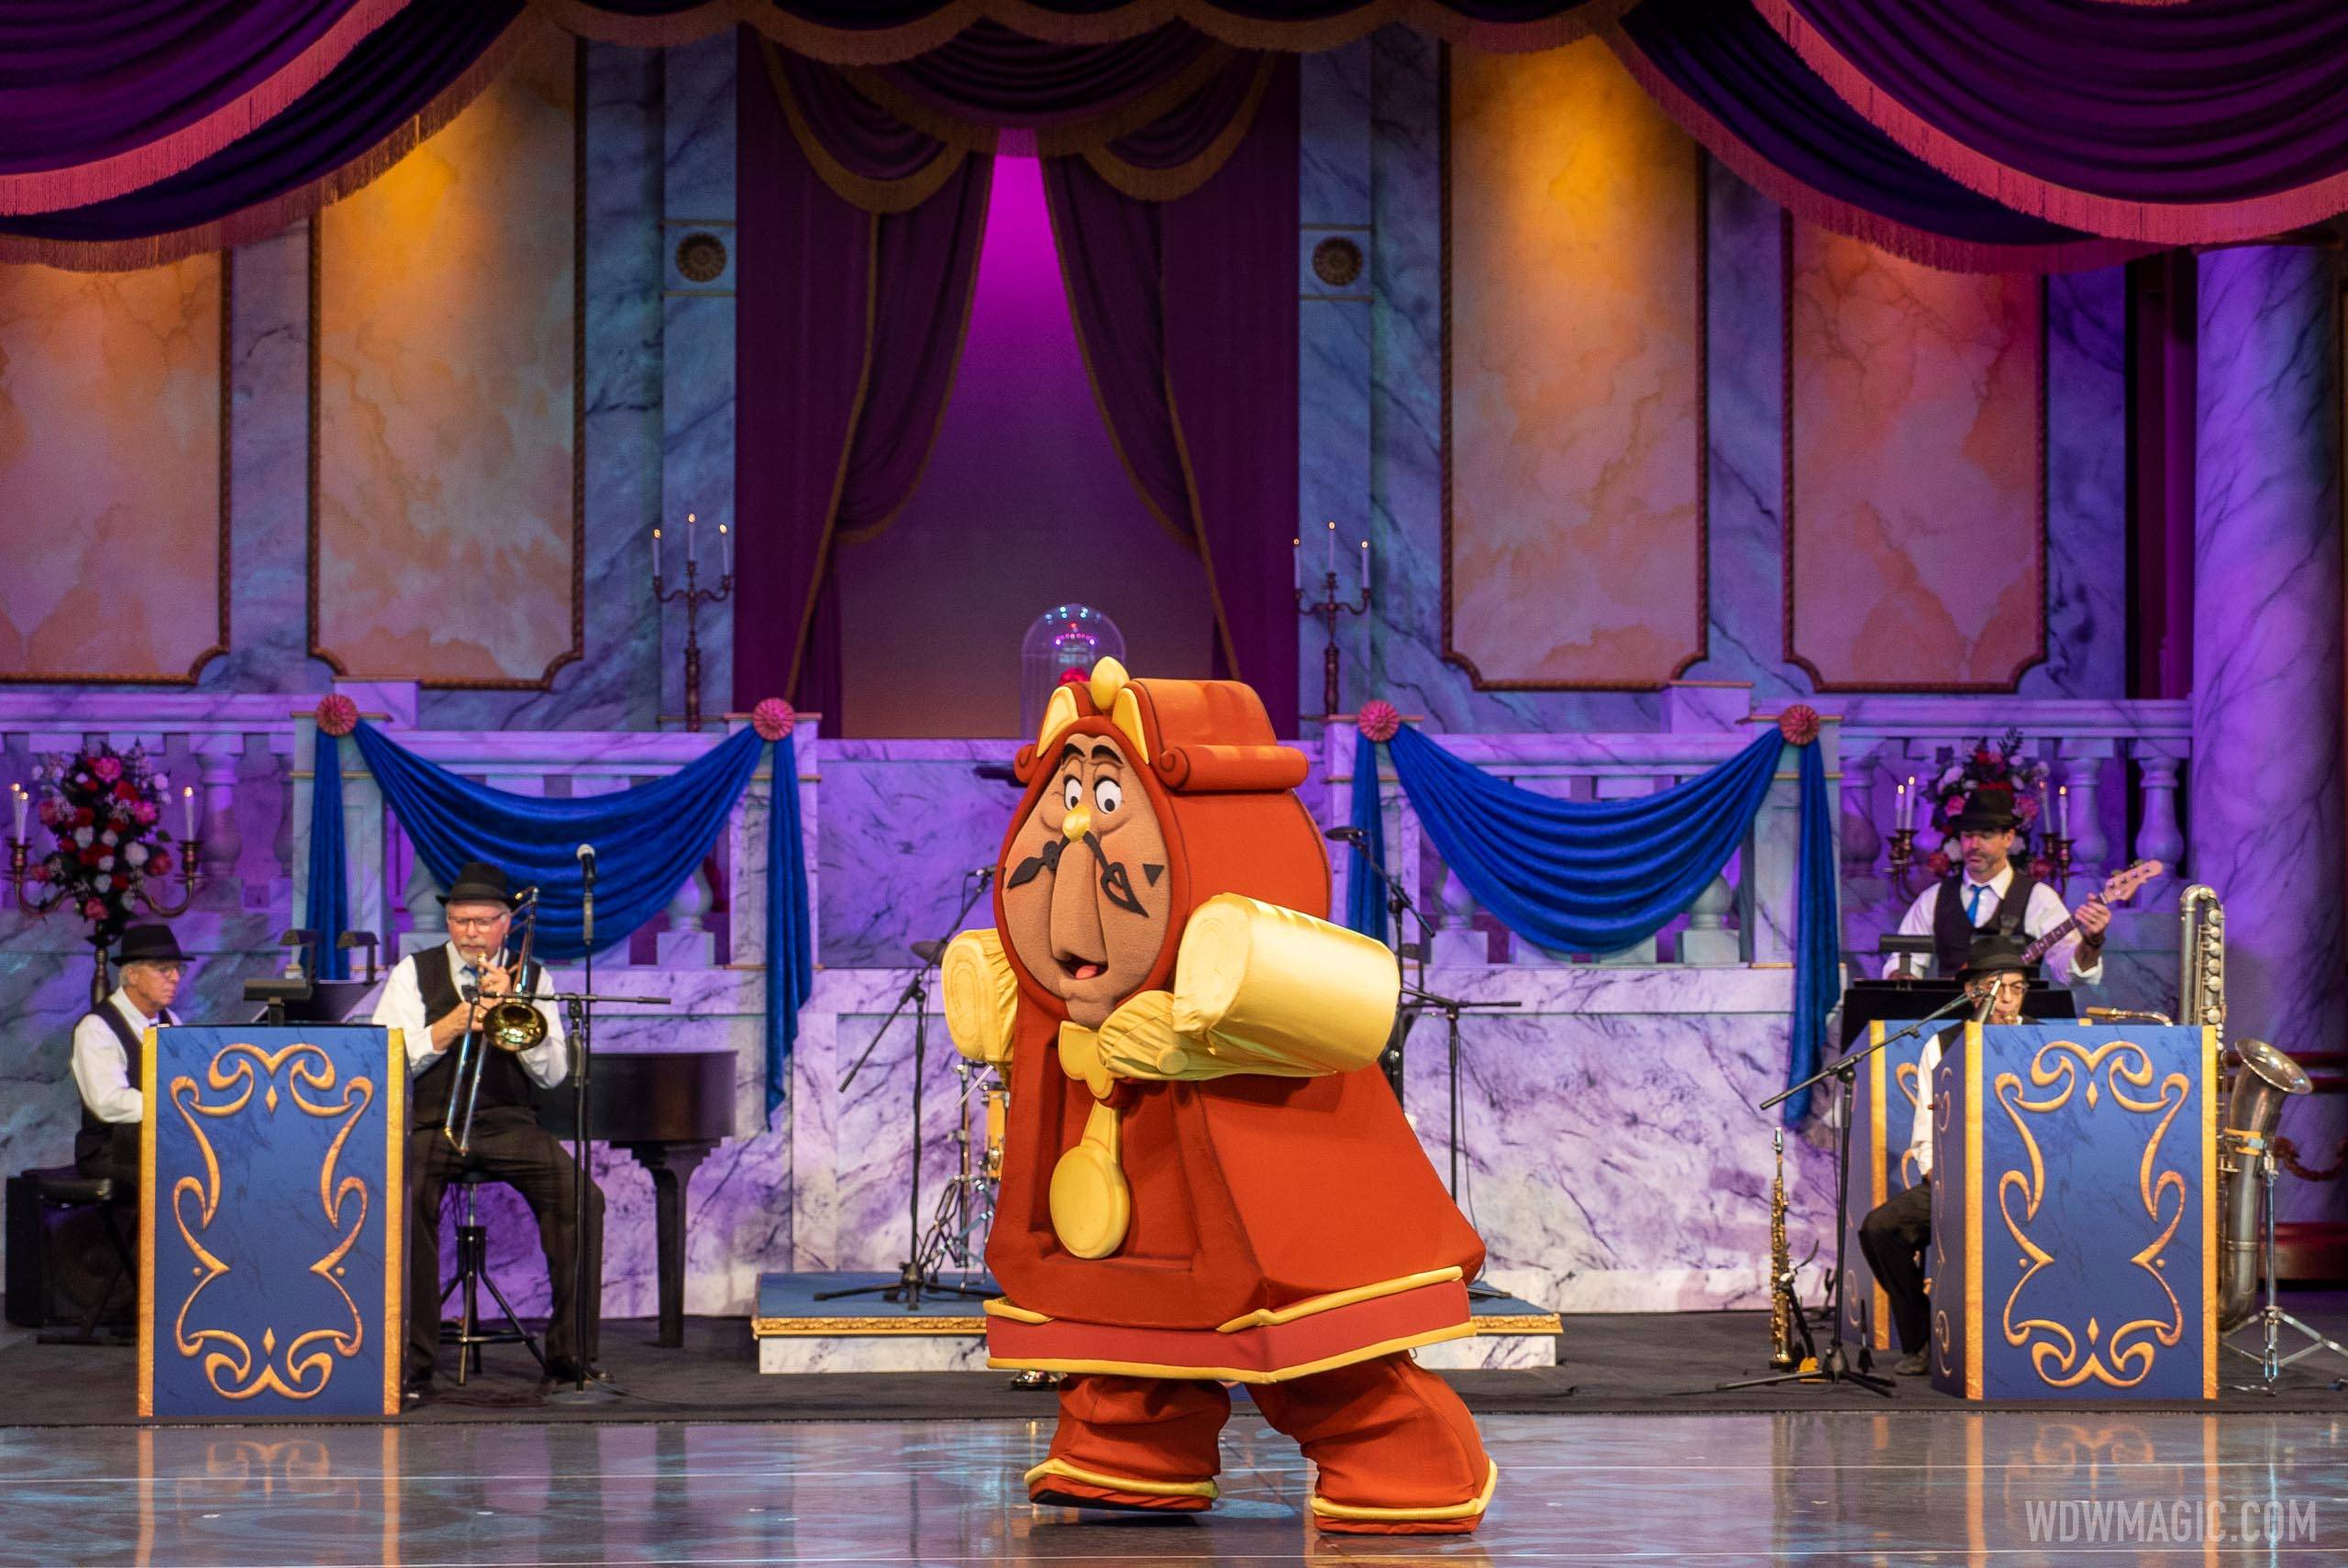 The Disney Society Orchestra and Friends